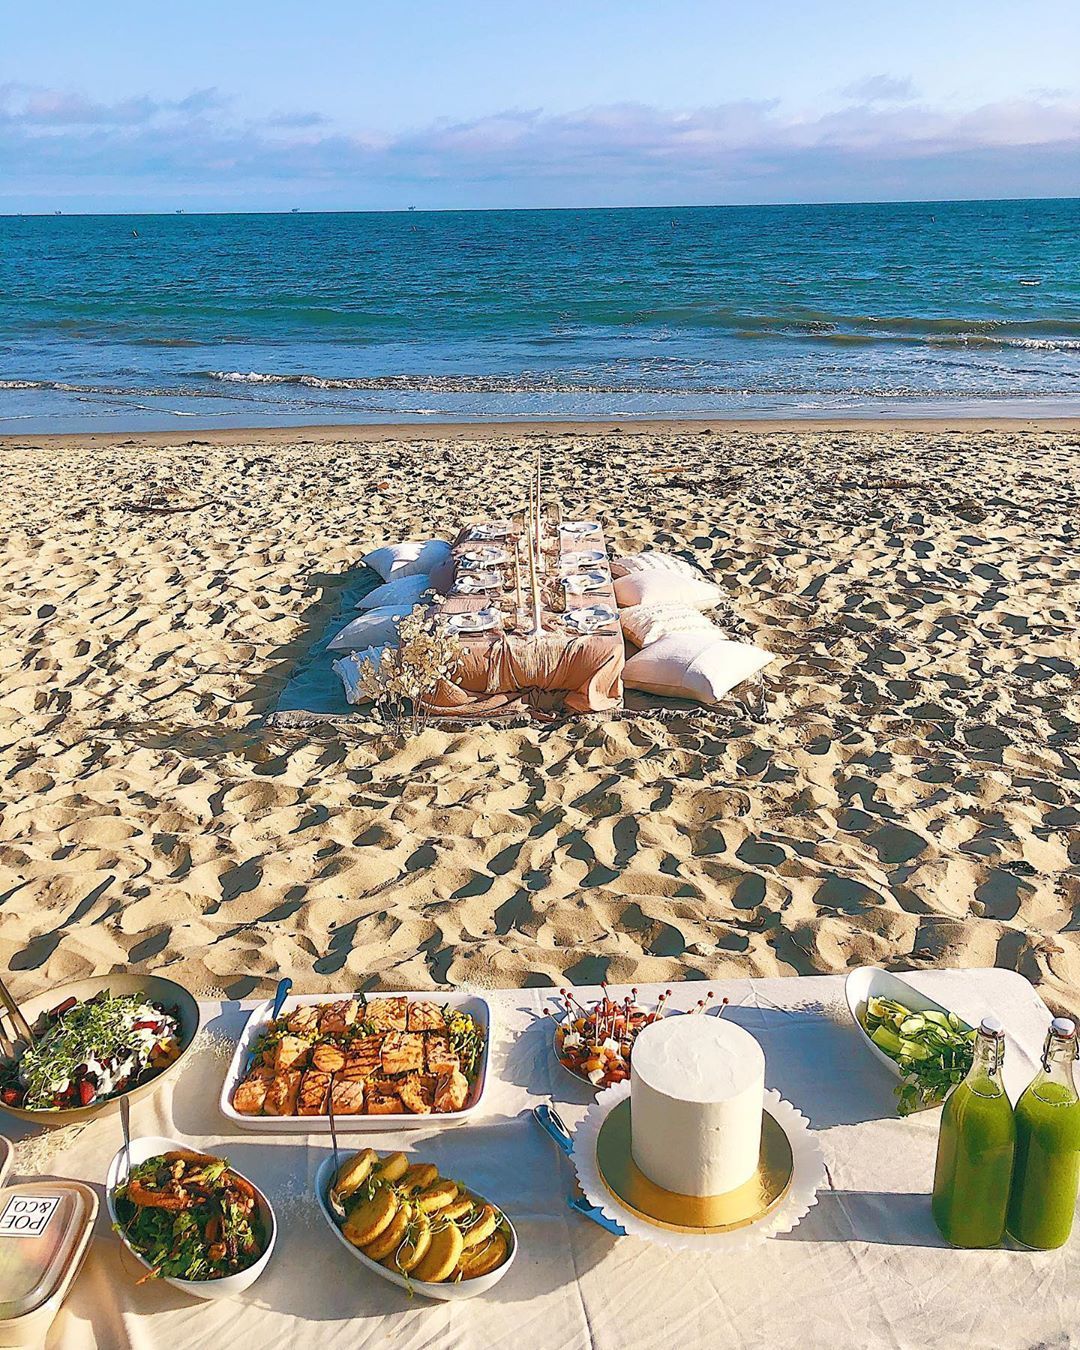 Catering + Meal Delivery on Instagram: Beach picnics are the best ...